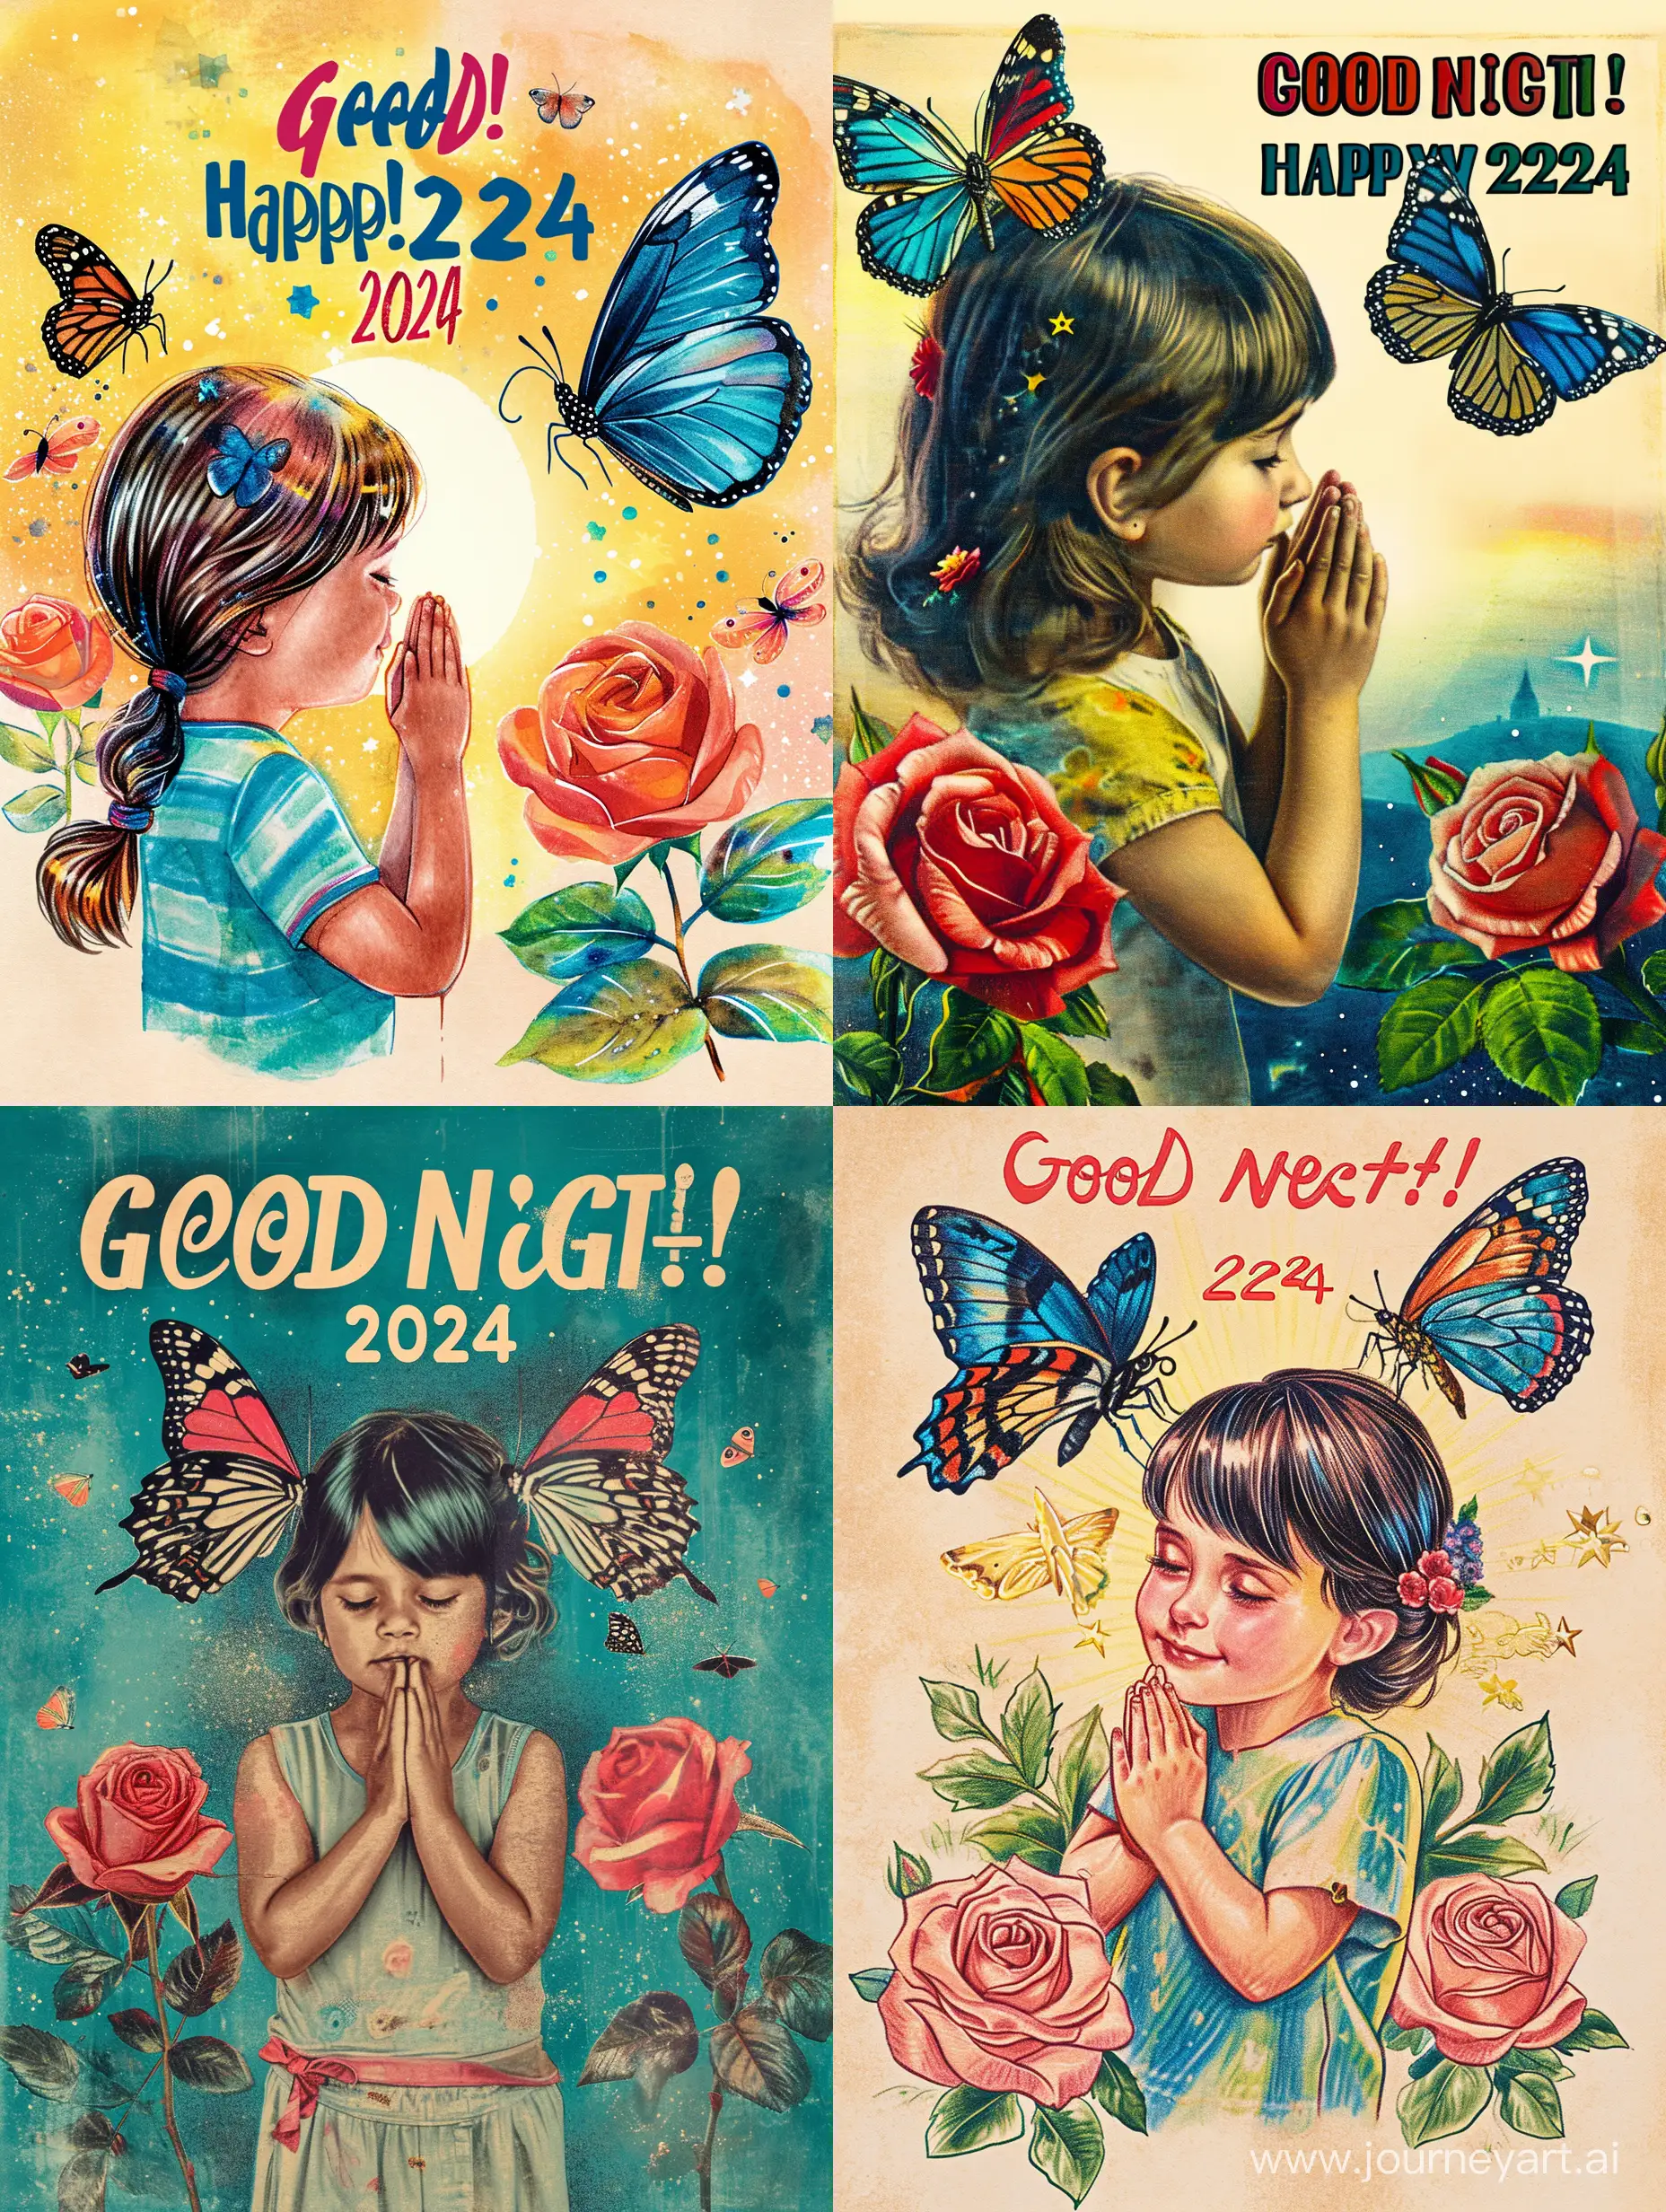 Heartwarming-Goodnight-Scene-Child-Praying-with-Butterflies-and-Roses-in-2024